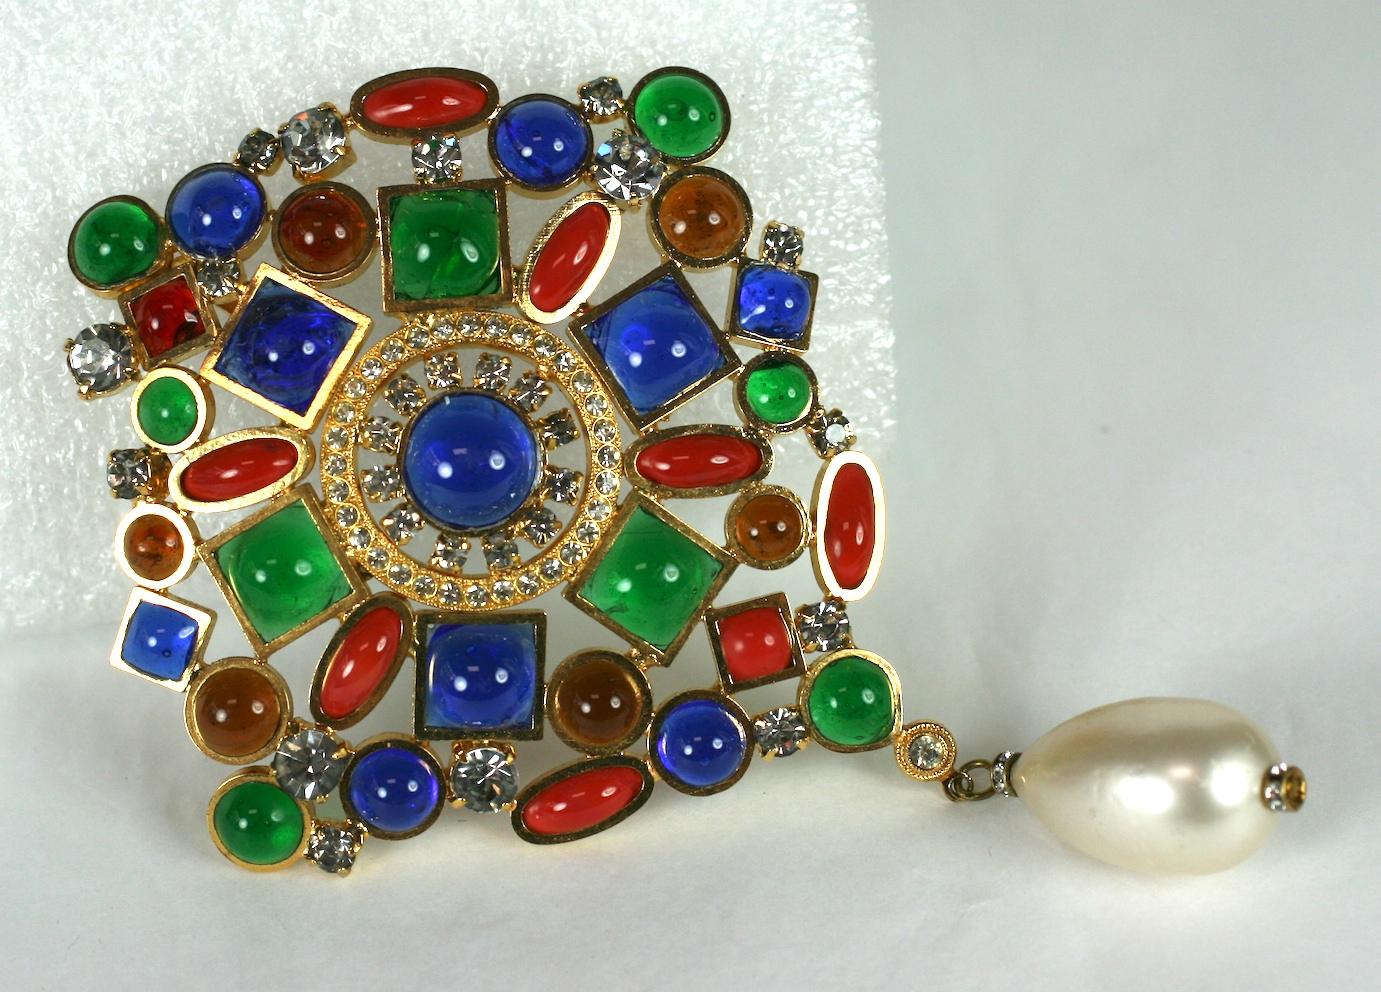 Massive Multi Colored  Byzantine Crest  pendant brooch made by  Maison Gripoix, France. Poured glass with rhinestone encrustations forming a large crest brooch with a hand made pearl pendant. 1980's France. 
Can also be worn as pendant. 5.5